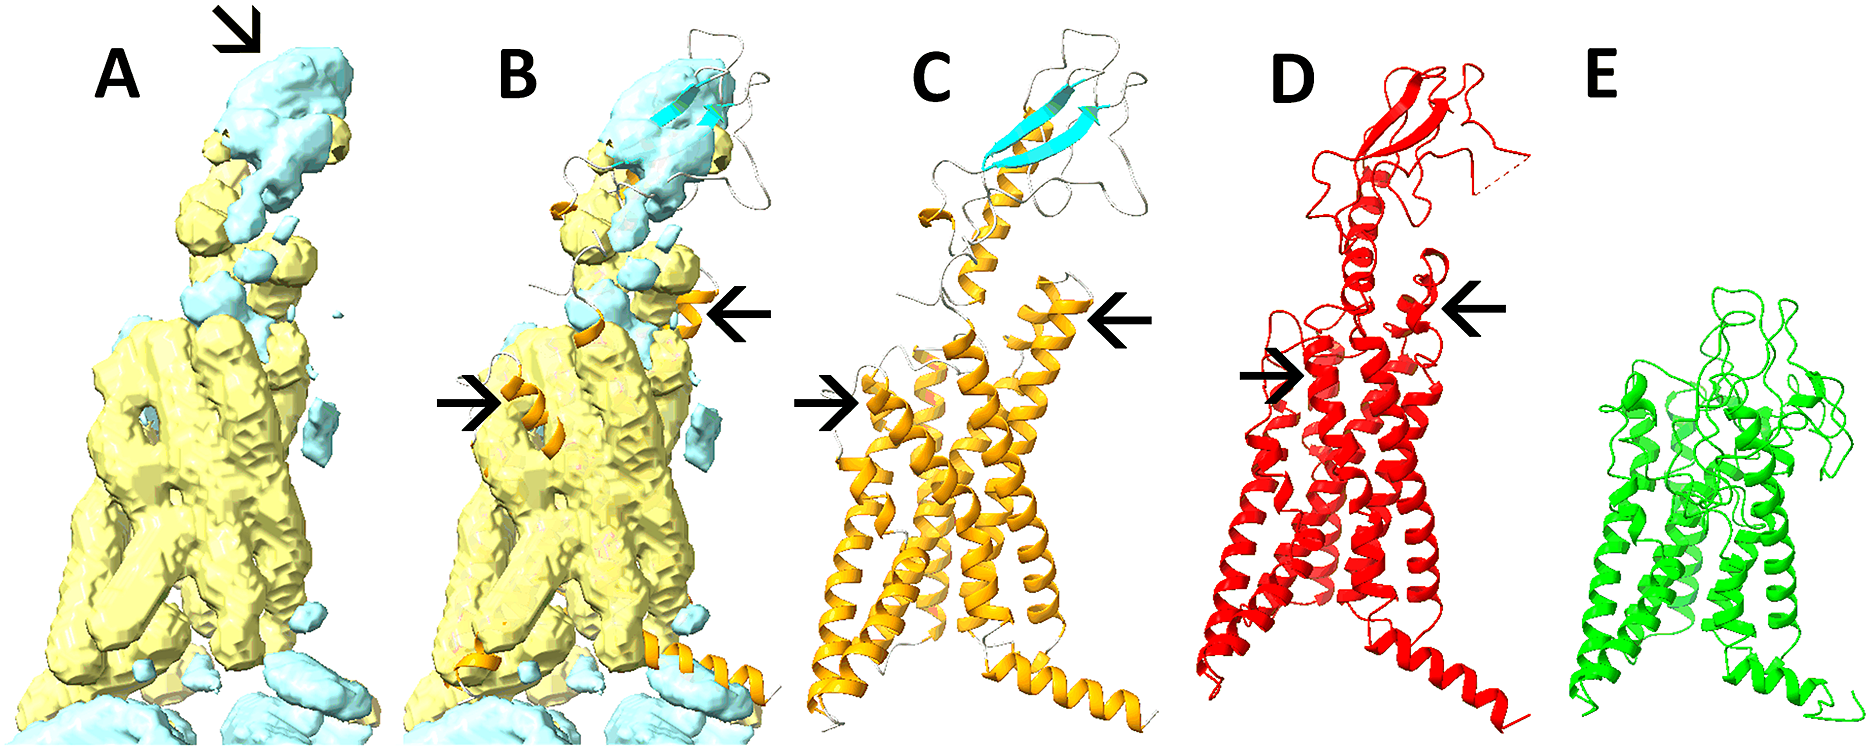 Frontiers  Multi-Scale Flexible Fitting of Proteins to Cryo-EM